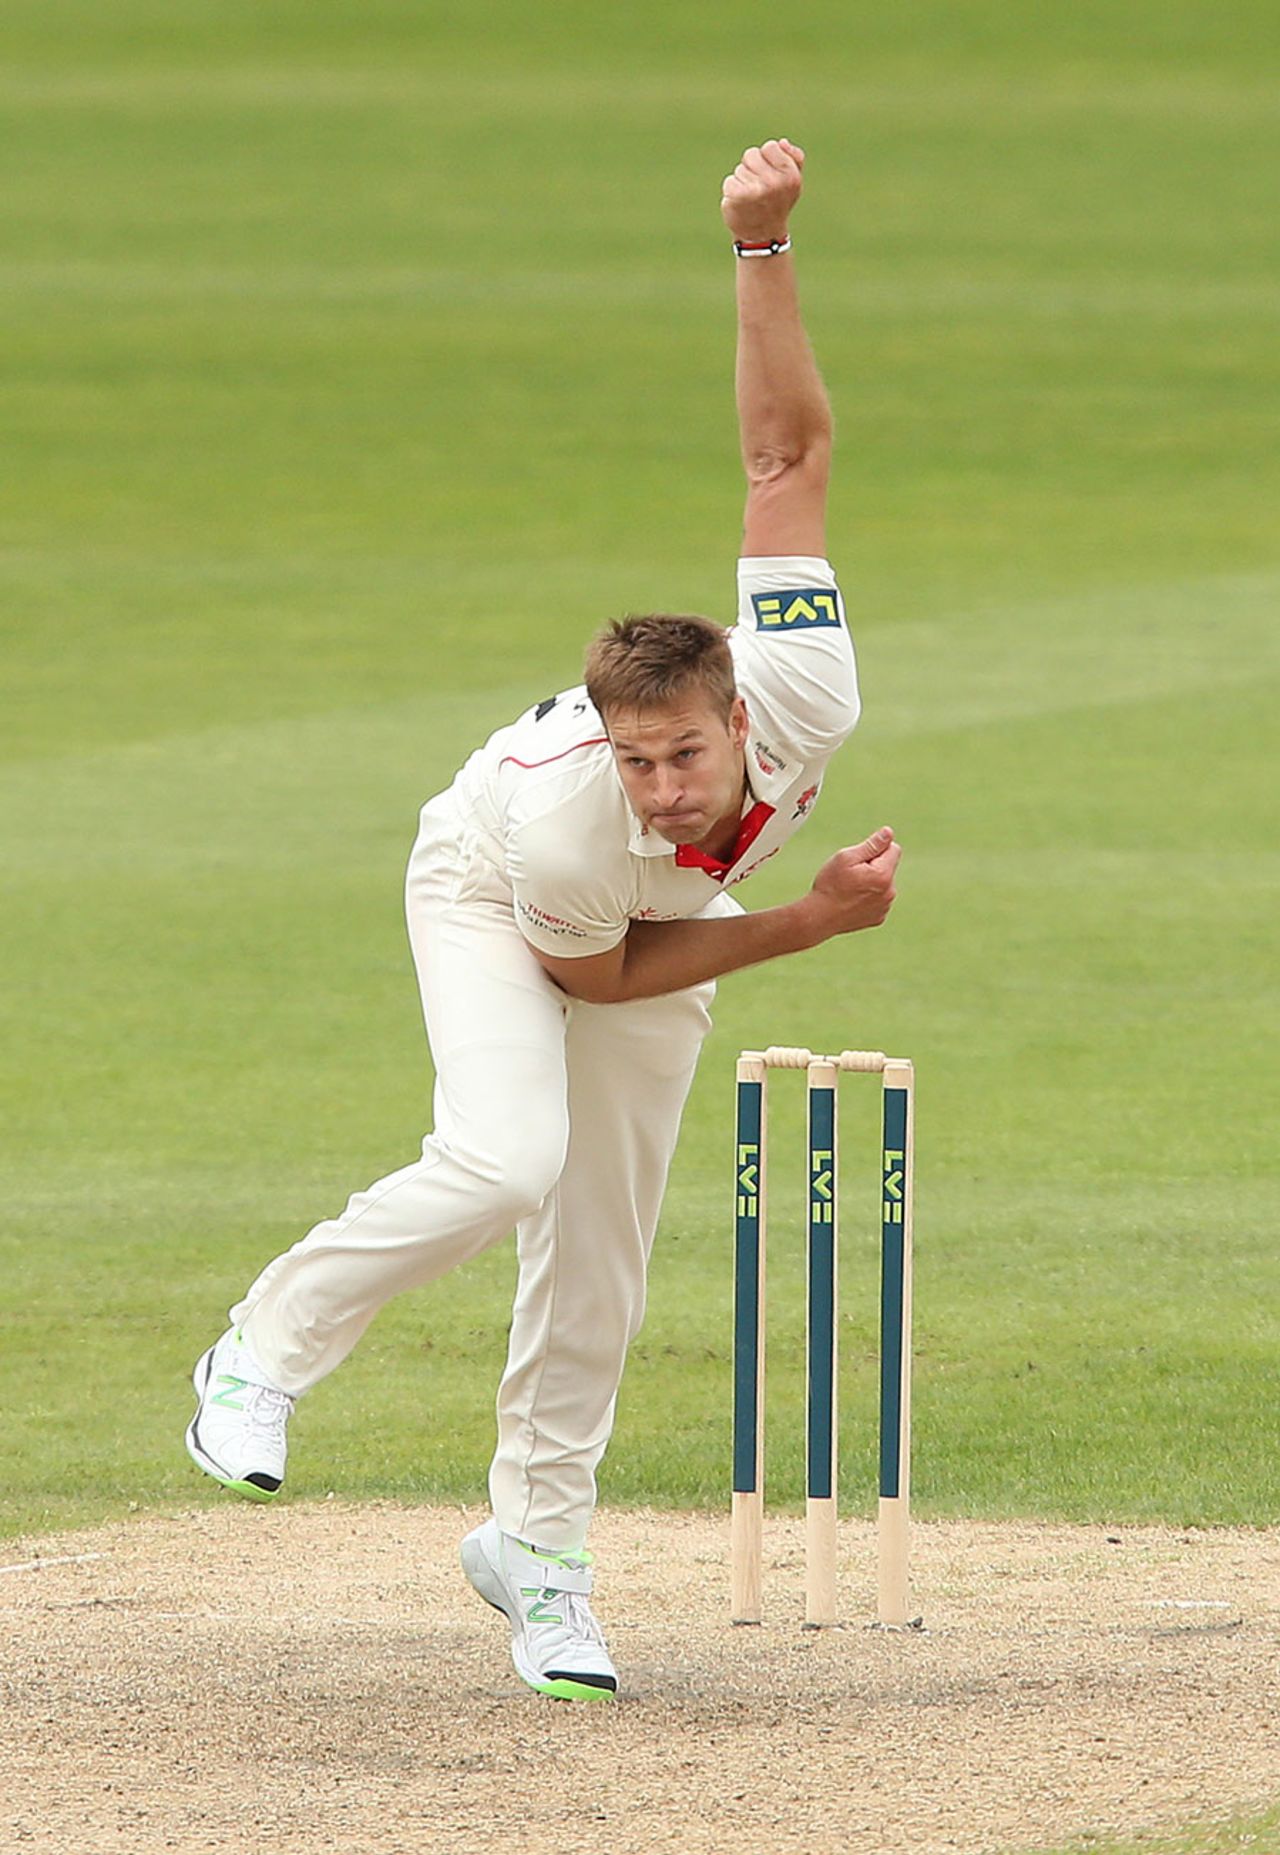 Kyle Jarvis picked up two cheap wickets, Lancashire v Sussex, County Championship, Division One, Old Trafford, 1st day, May 4, 2014